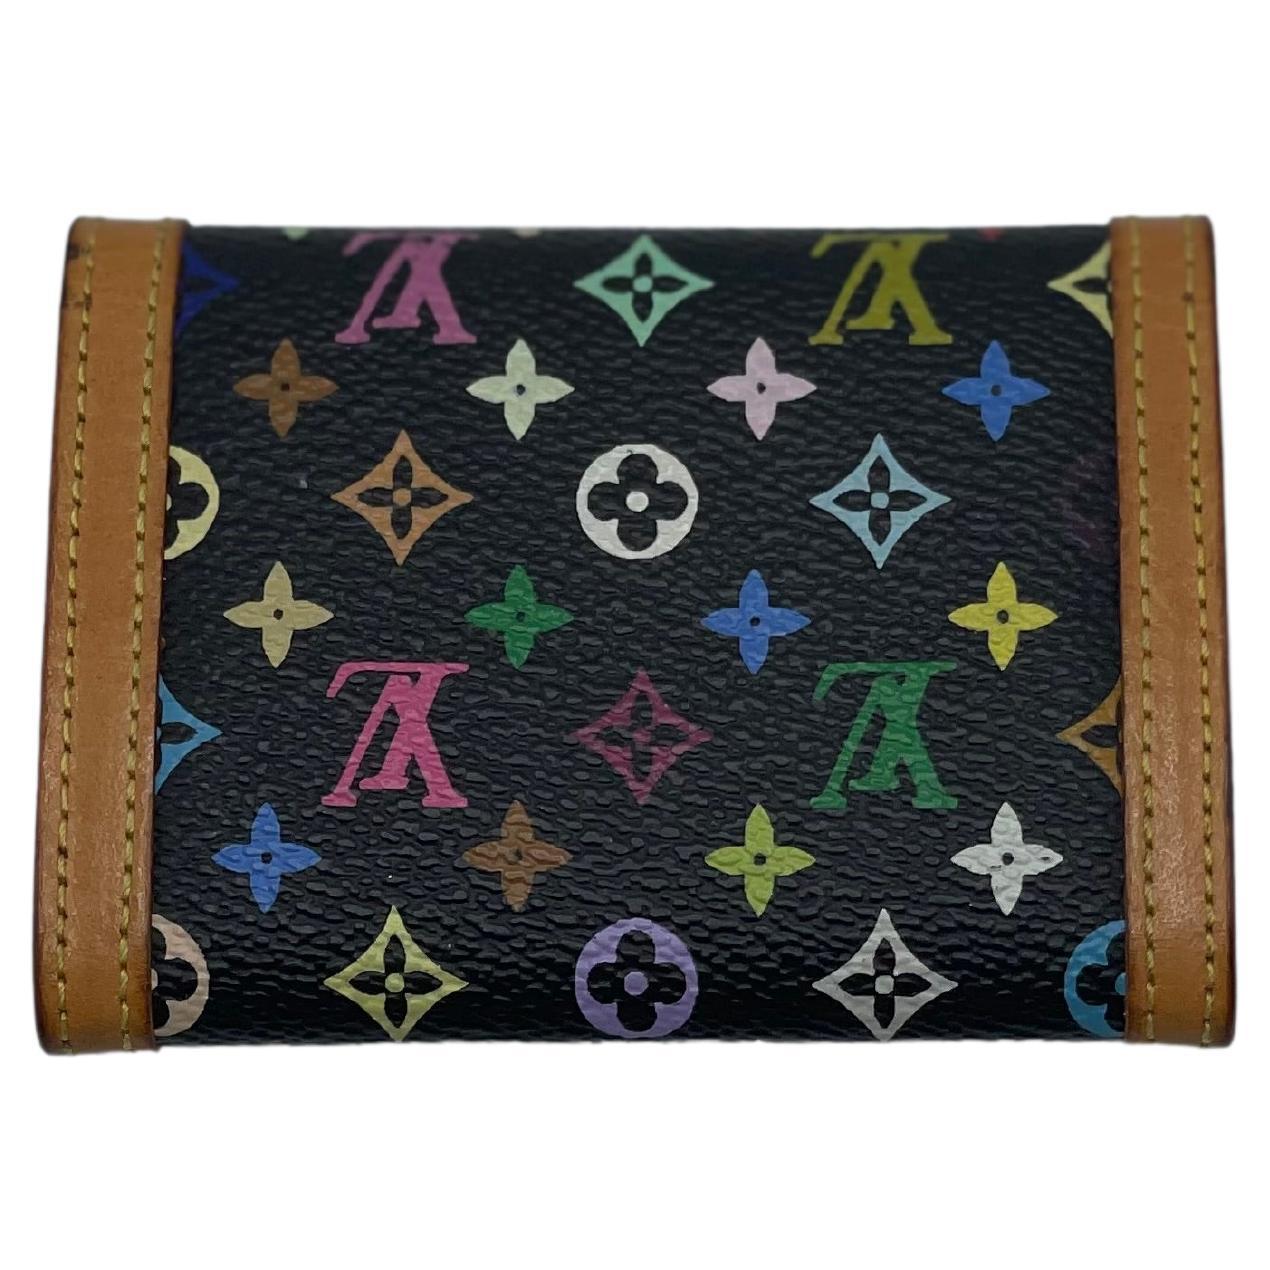 From the historic partnership between Murakami and Louis Vuitton, this Porte Monnaie Plat card holder is constructed from coated canvas with Murakami's eye-catching Multicolore design, natural Vachetta leather trim, and gold-tone brass hardware.